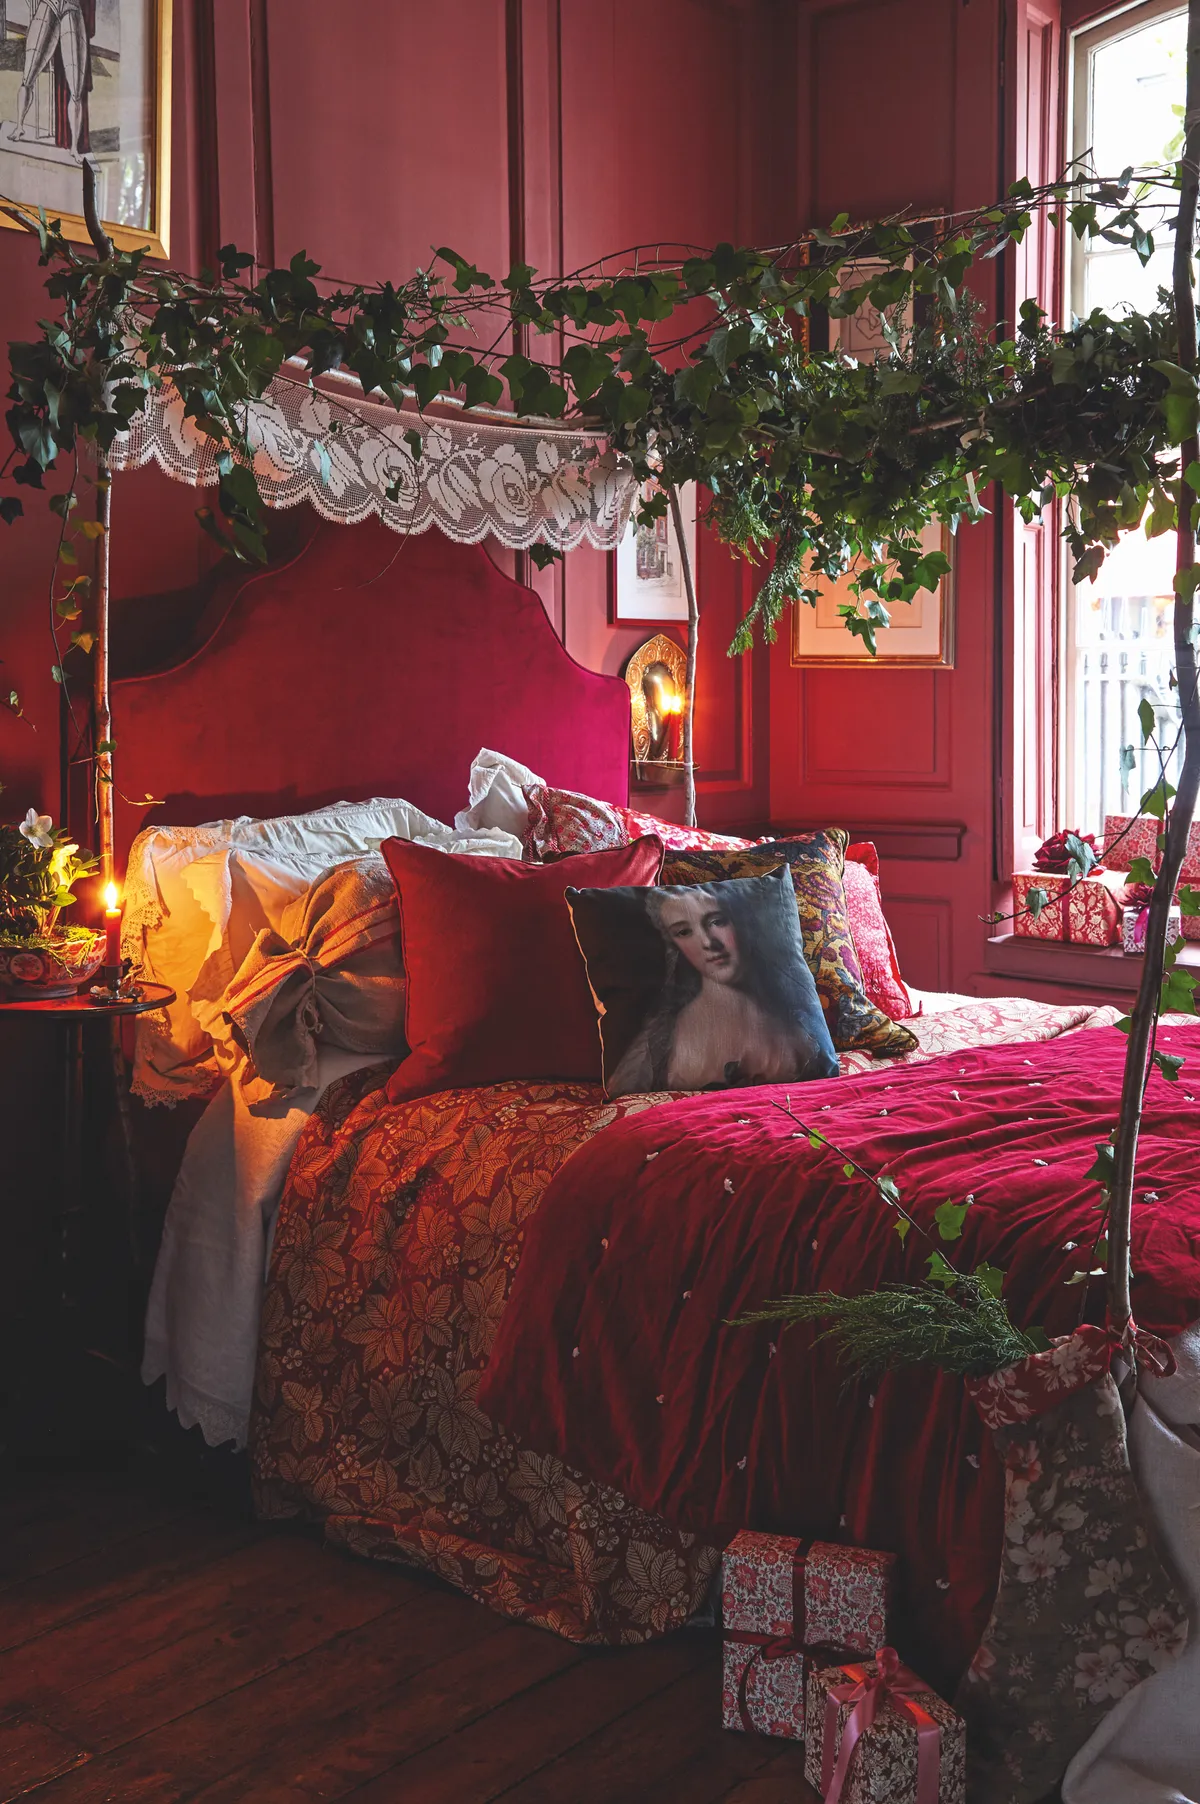 Layer your spare bed with linen, throws and cushions in shades of crimson, white and gold. Antique lace, velvet and a canopy made from boughs of natural foliage produce a welcoming festive haven for your guests to withdraw to